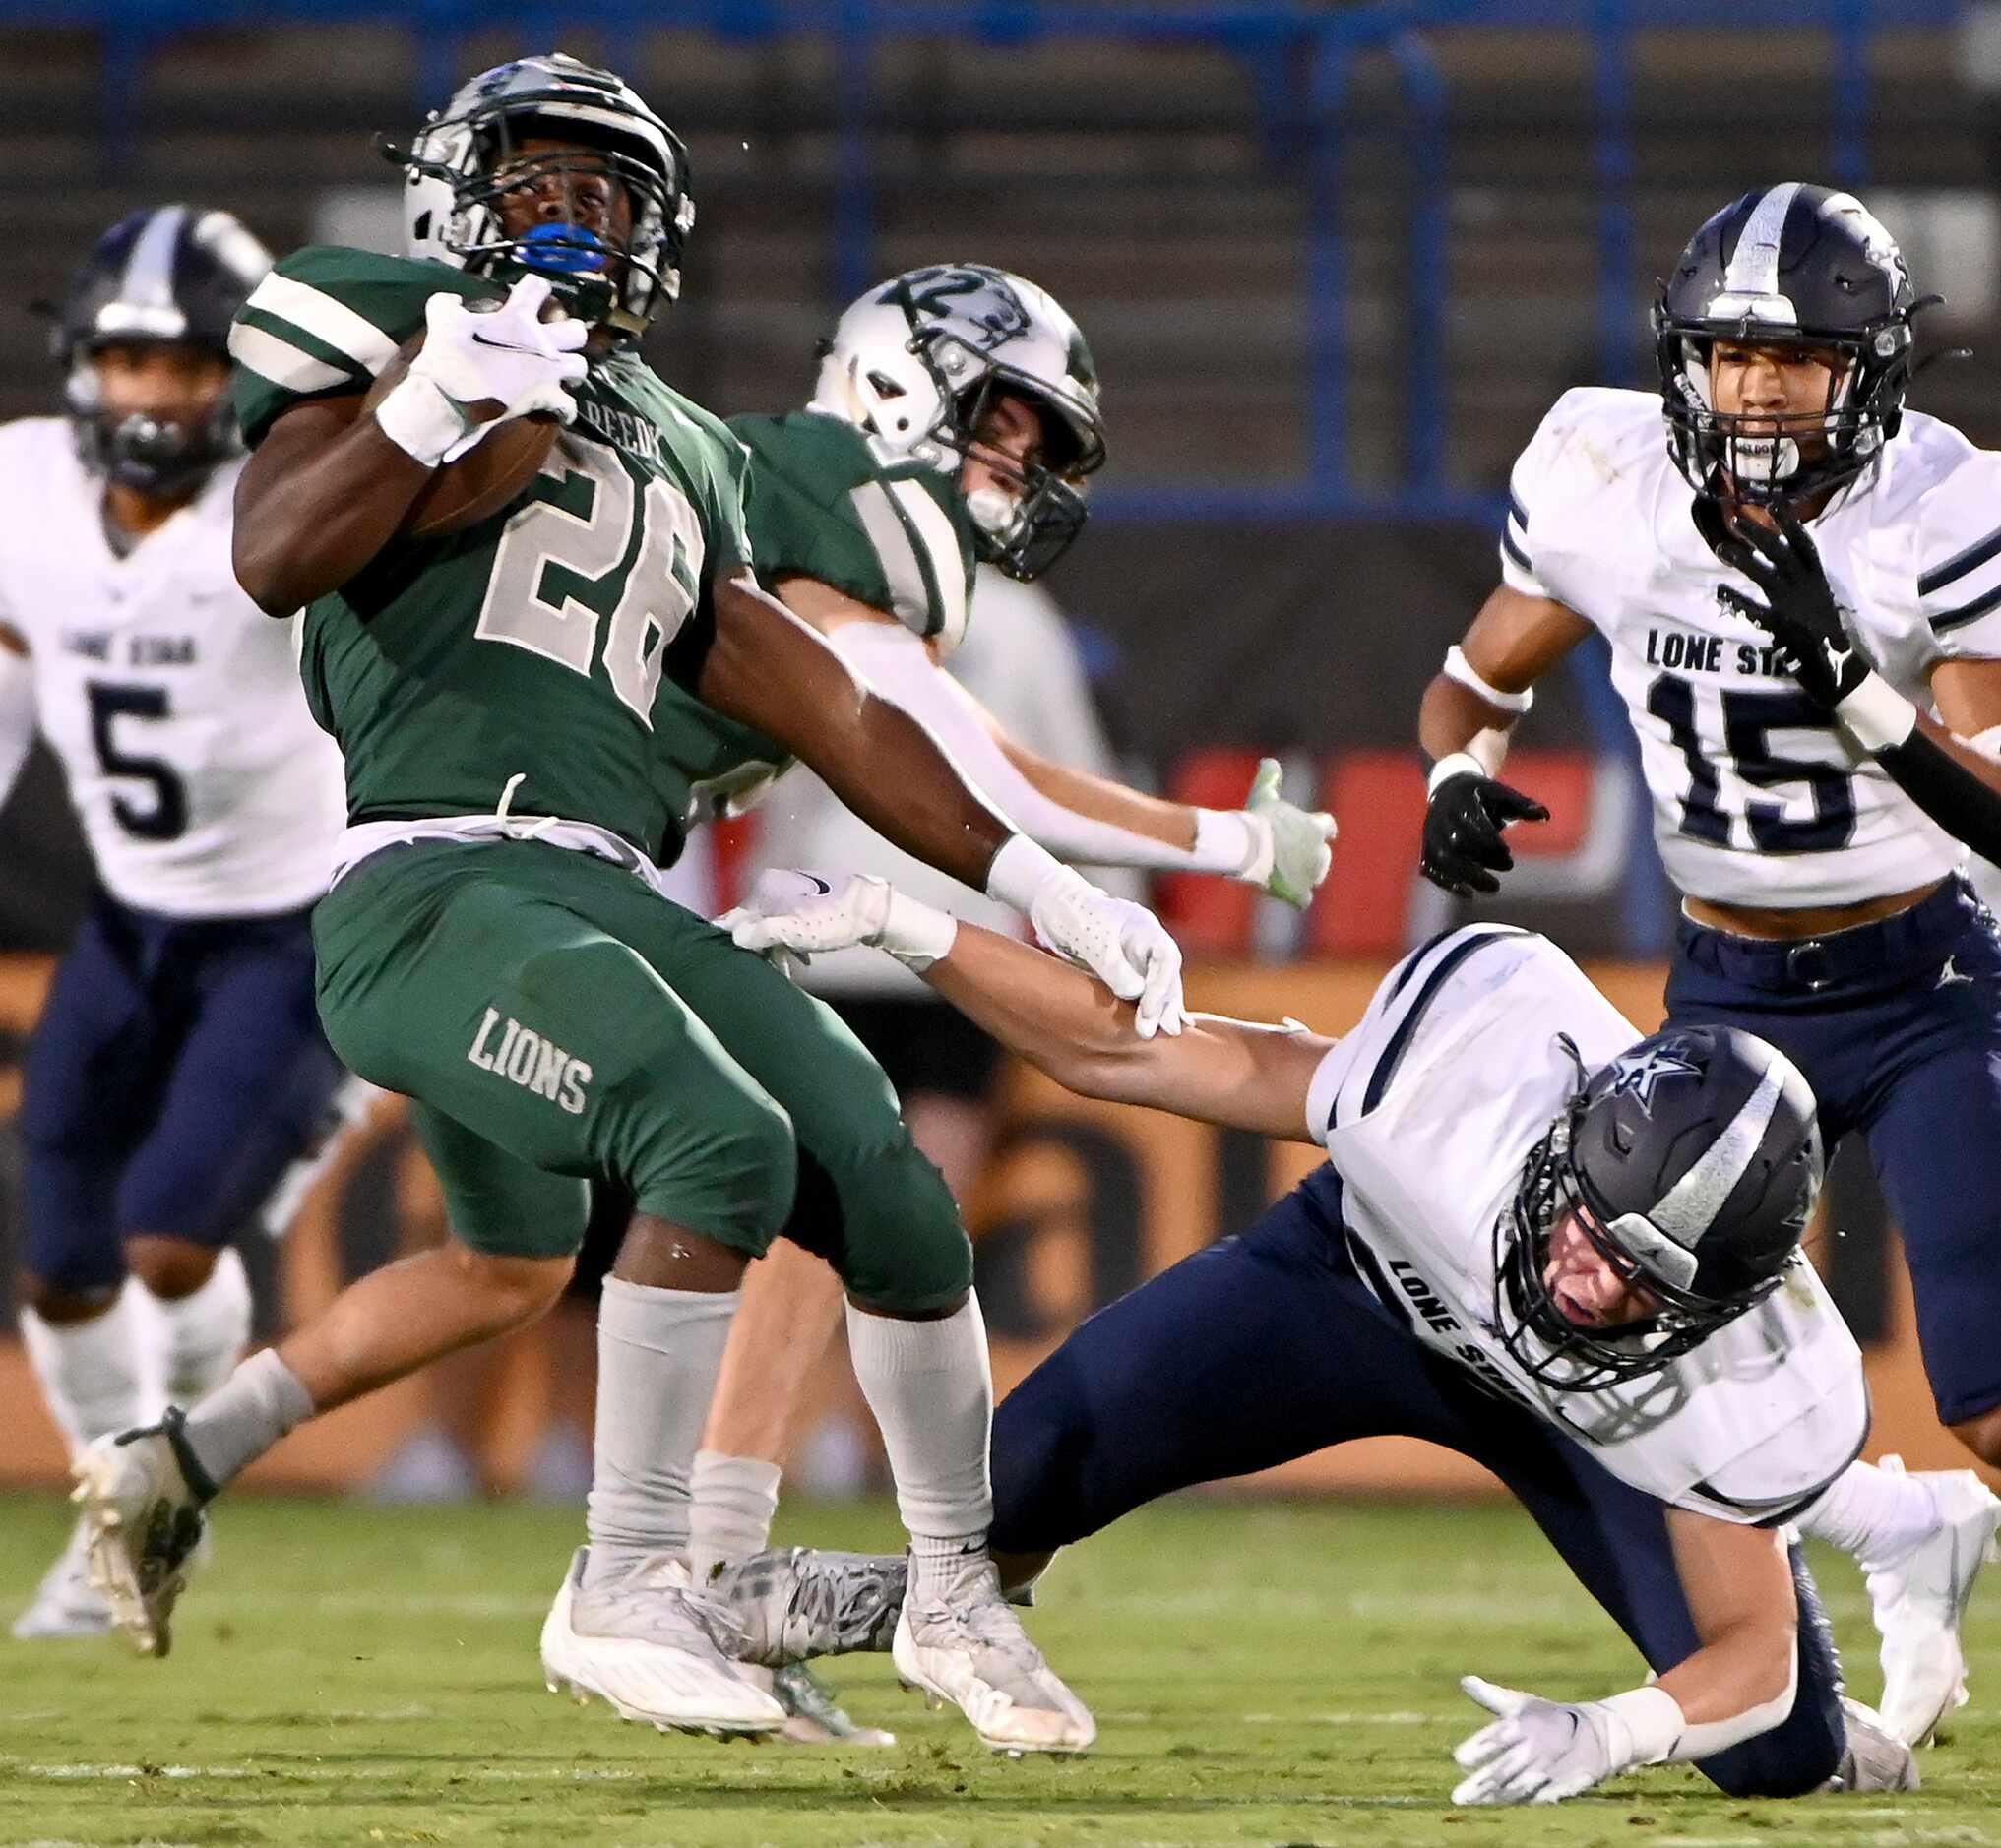 Frisco Reedy’s Aaron Daniels (26) spins out of a tackle attempt by Frisco Lone Star’s Zach...